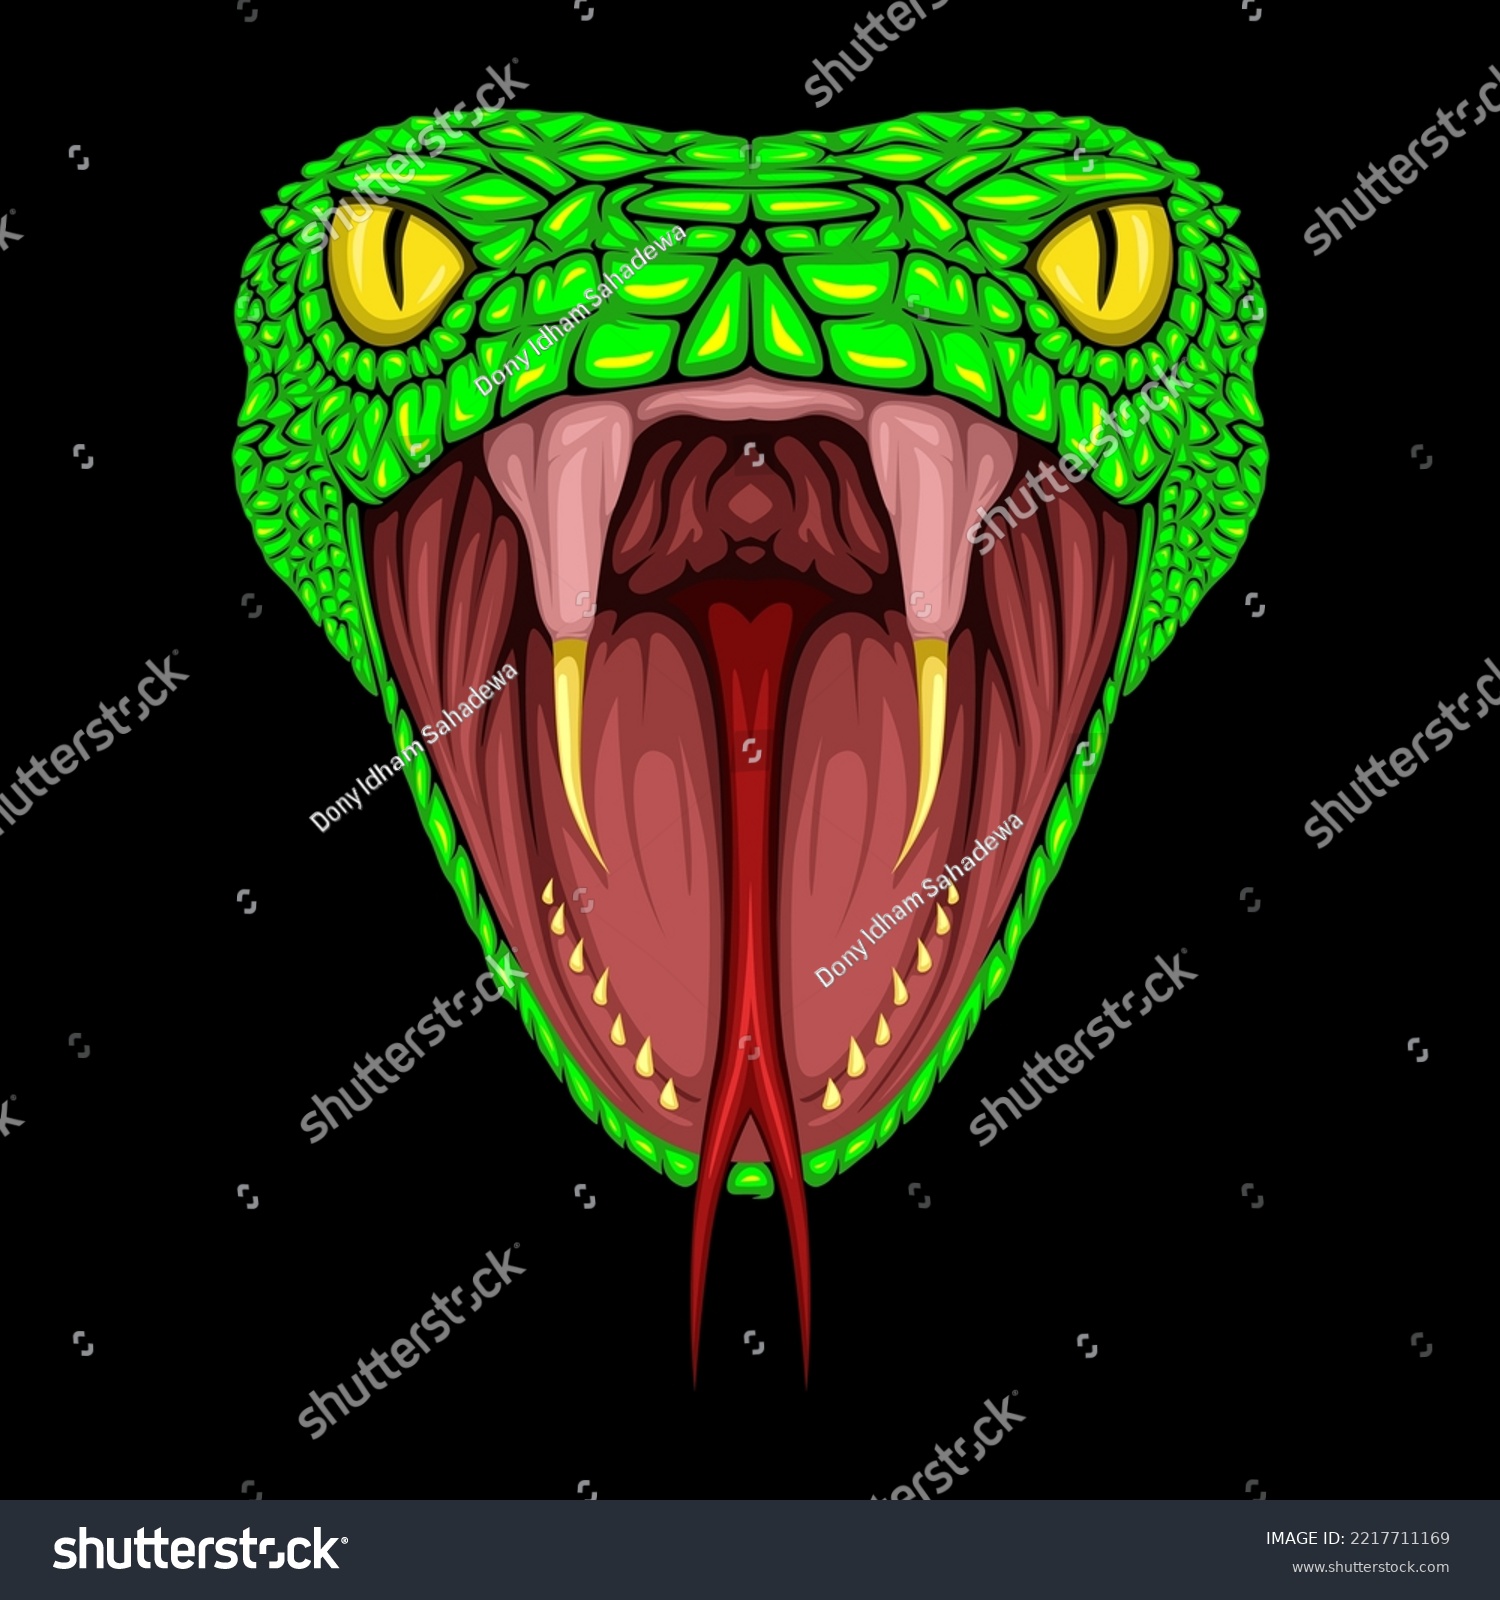 SVG of Head of Green Viper with Opened Mouth Vector Isolated on Blank Background svg